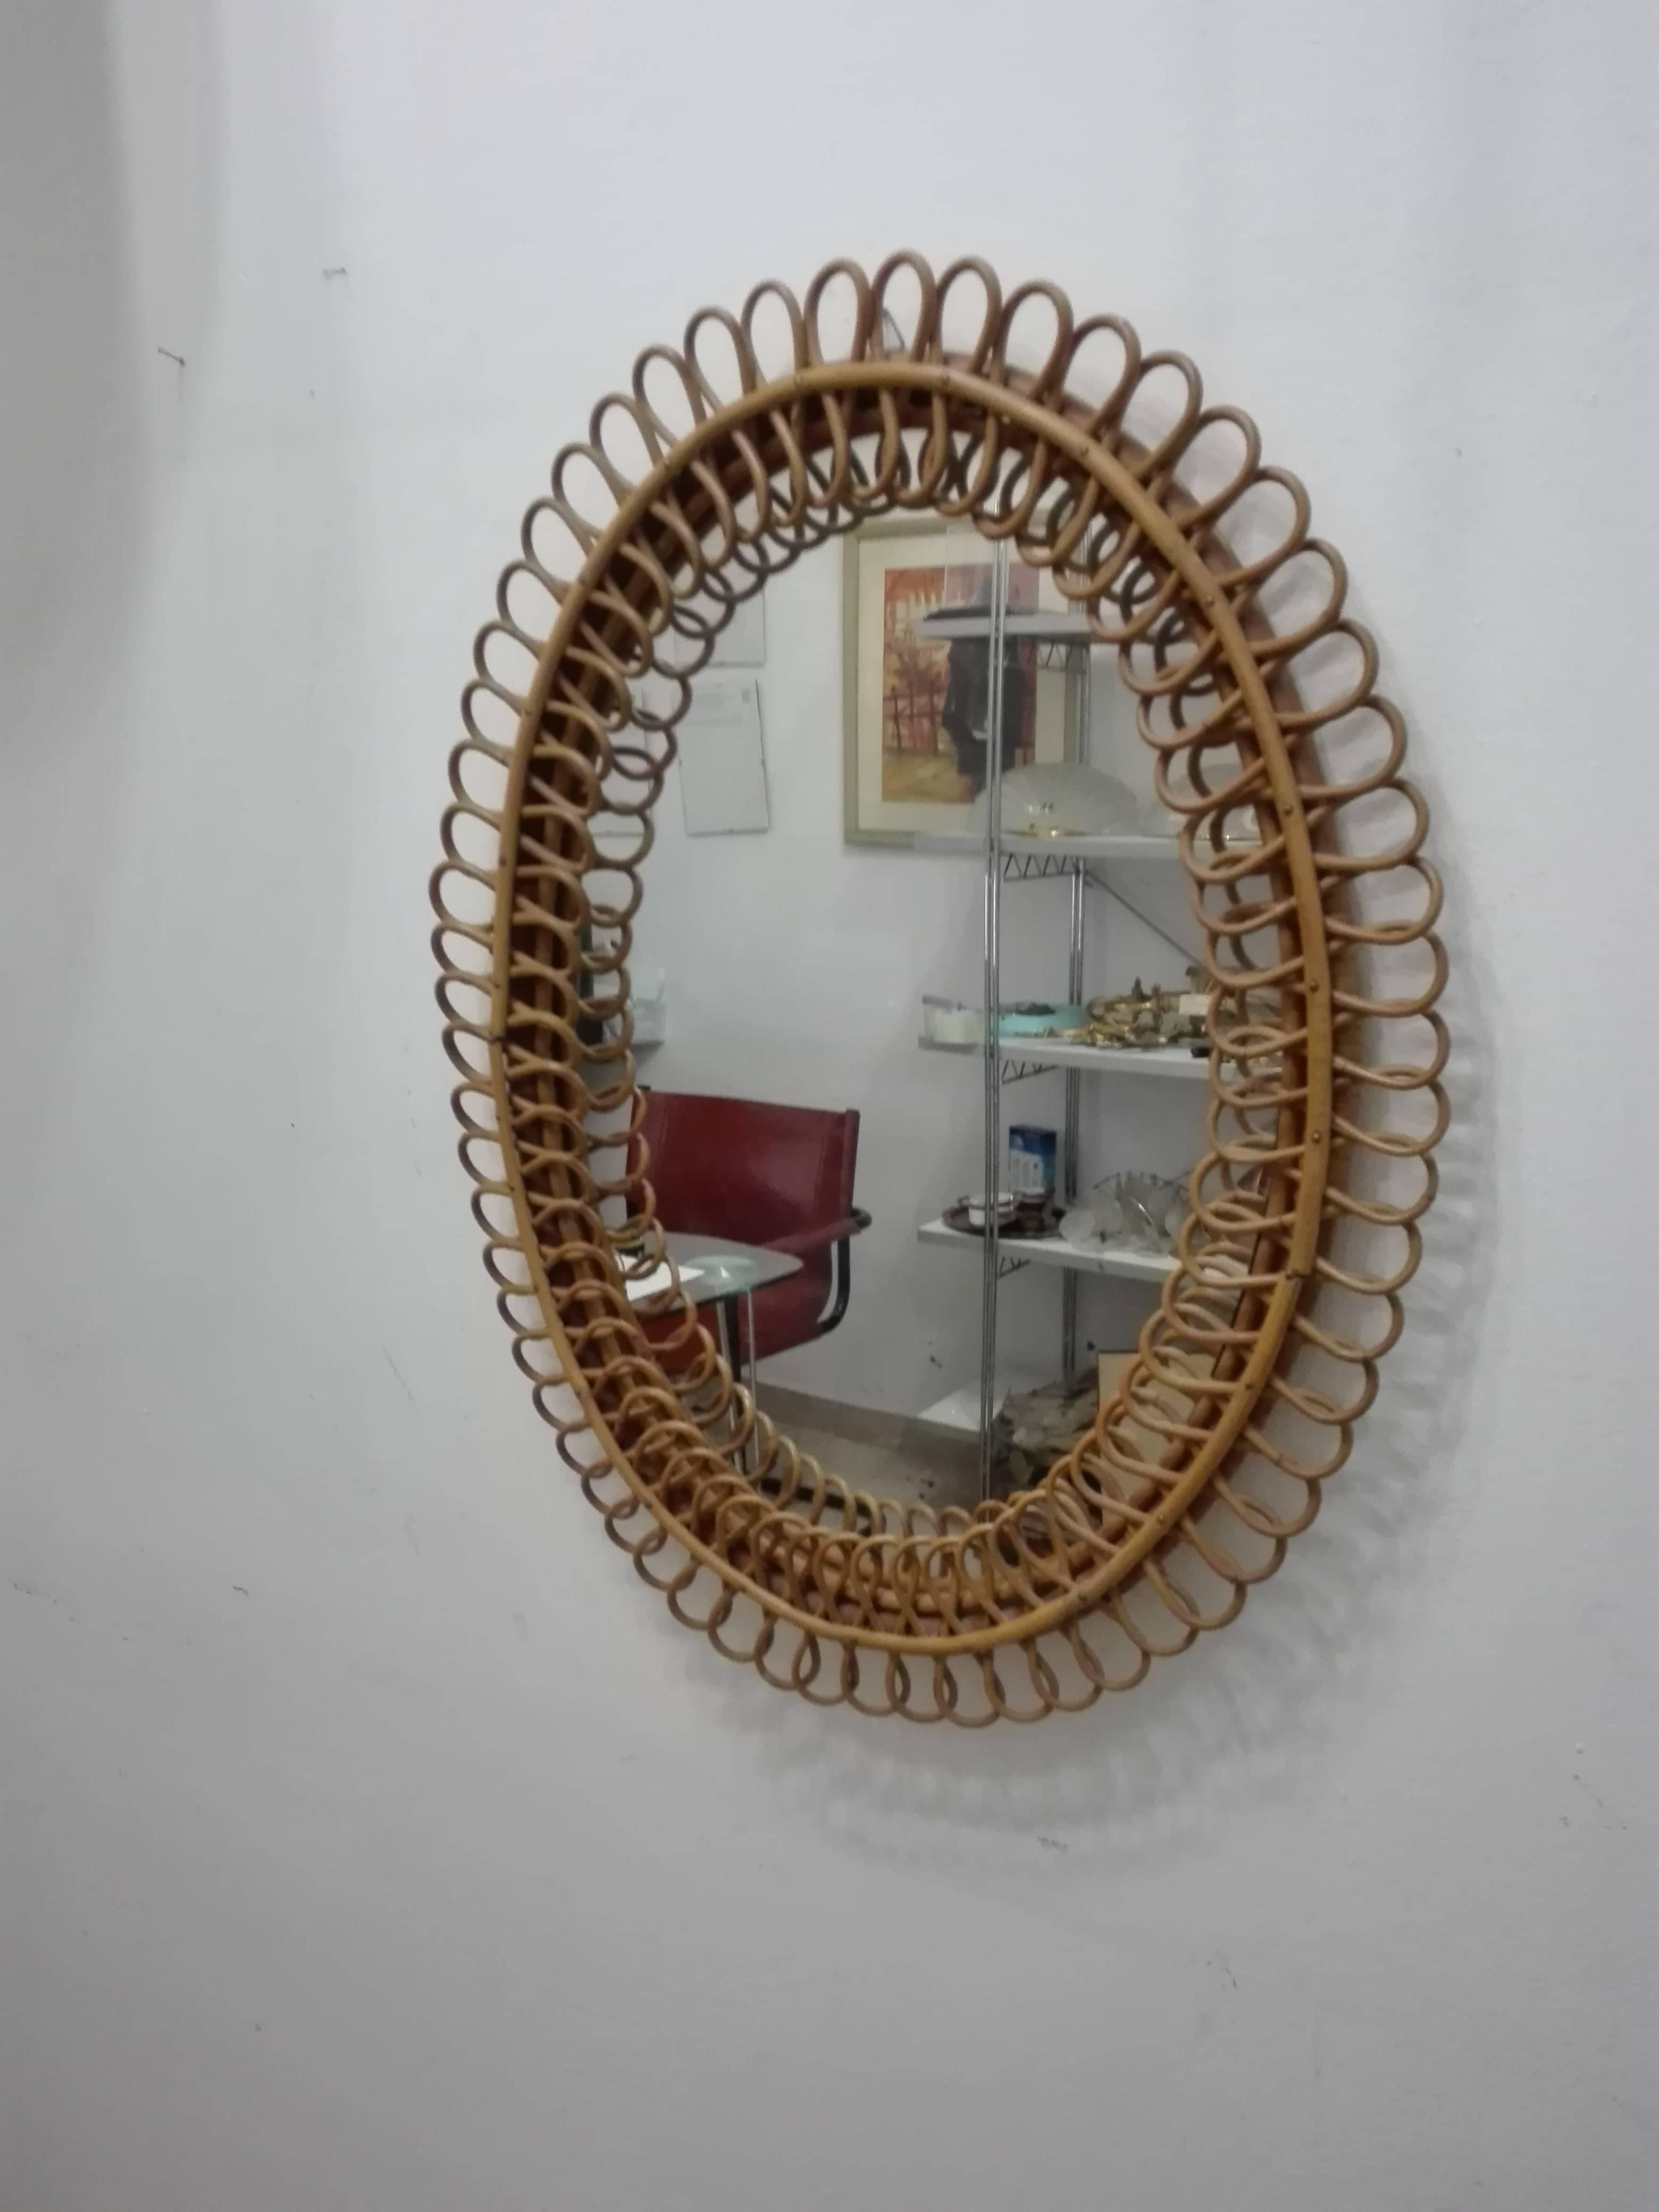 Mirror rattan model in rattan in full style Gio bridges datable in the 20th century, 1950 style deco design. Excellent quality of the wicker or the steamed bamboo handcrafted and in hand, in the style of the famous designer, we immediately speak of